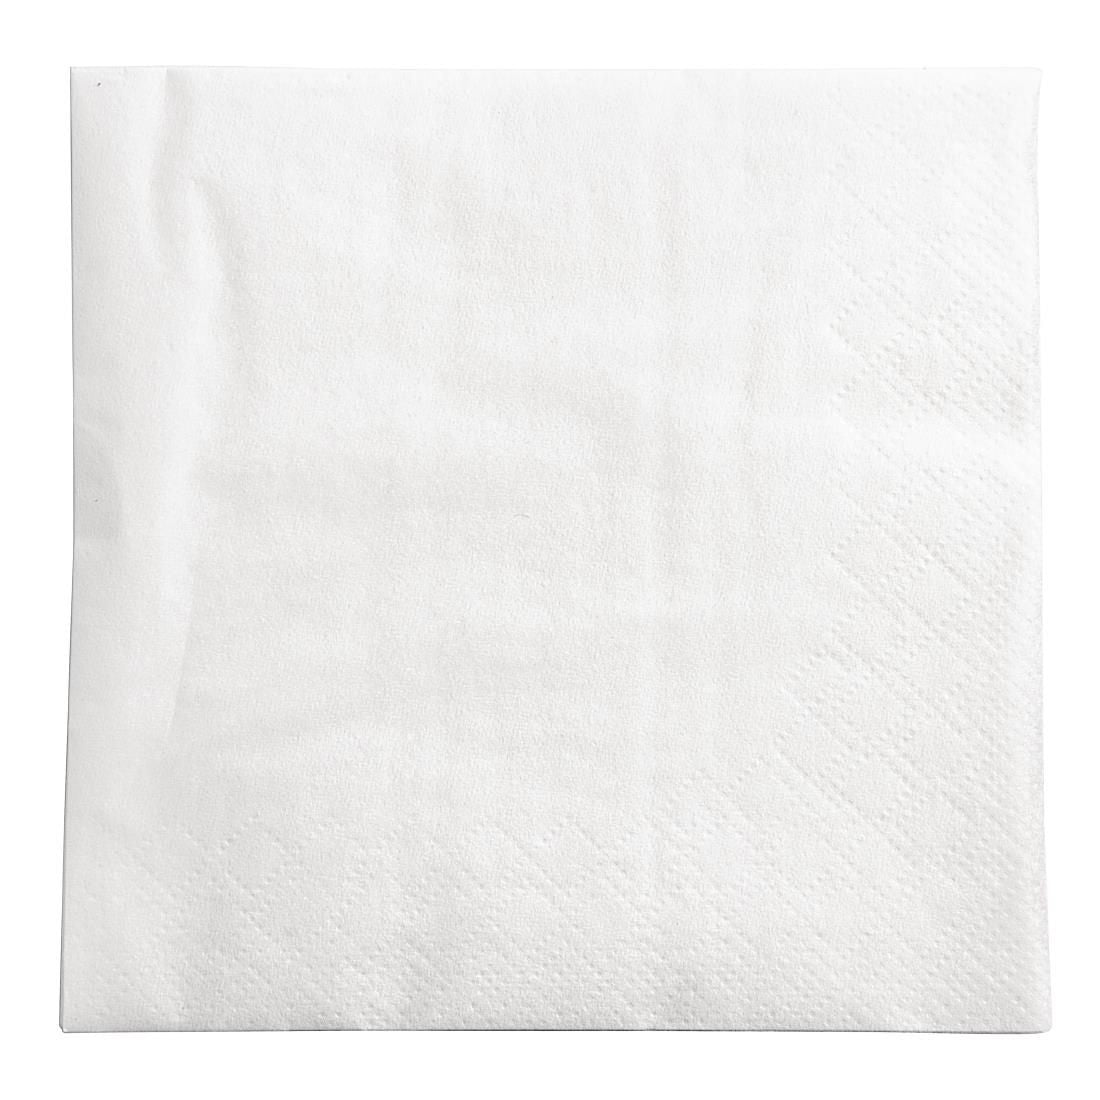 Fasana Cocktail Napkins White 240mm (Pack of 1500) JD Catering Equipment Solutions Ltd